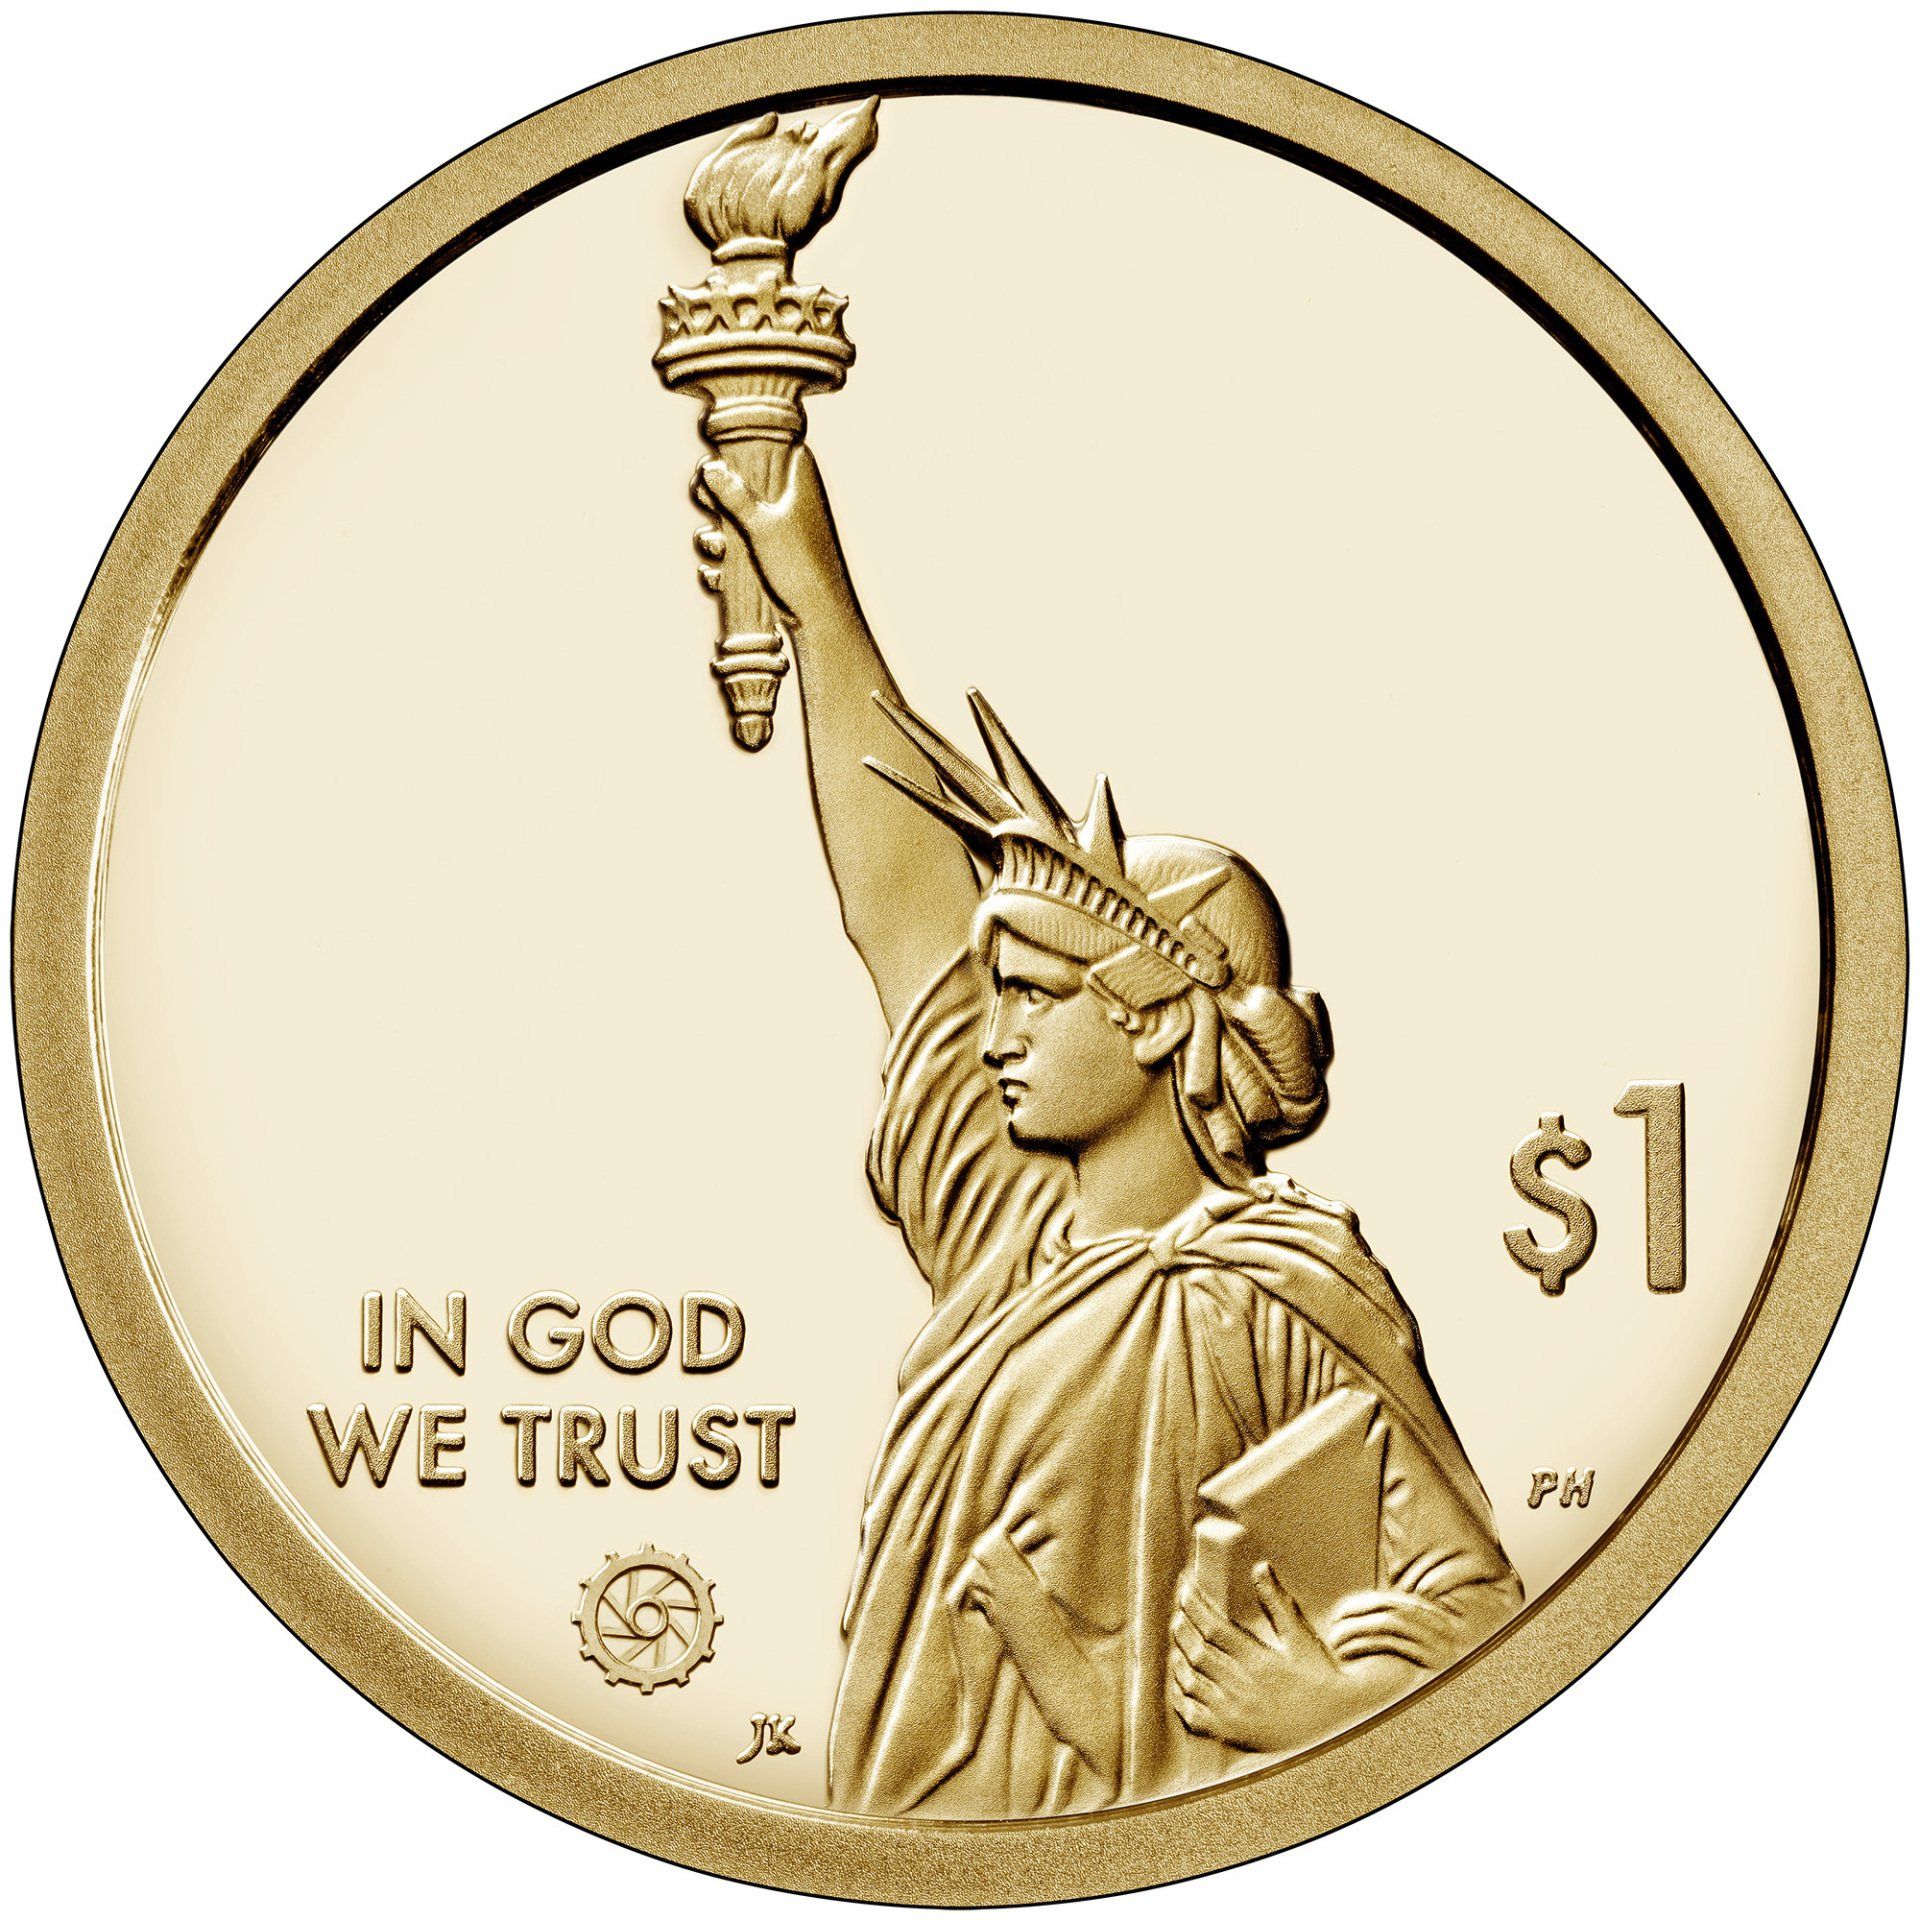 obverse design of the American Innovation $1 coin shows a representation of the Statue of Liberty in profile. The obverse also includes a privy mark of a stylized gear, representing industry and innovation.